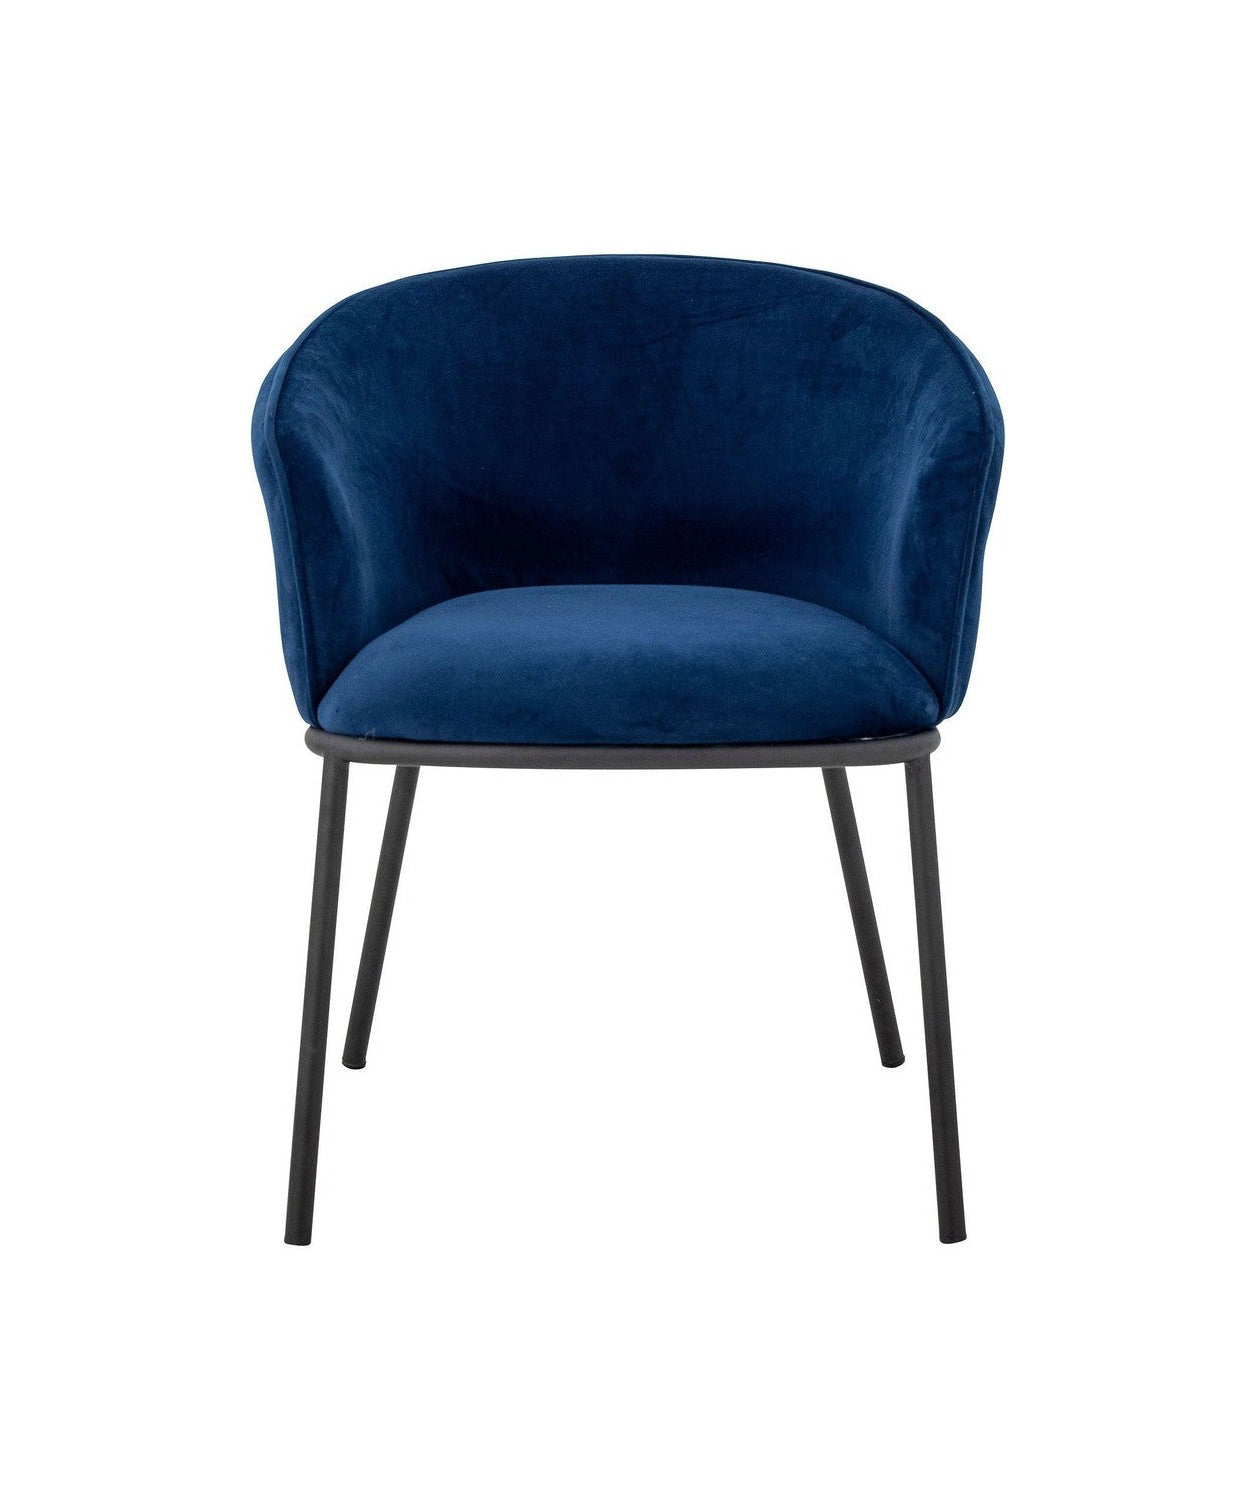 Bloomingville Cortone Dining Chair, Blue, Recycled Polyester